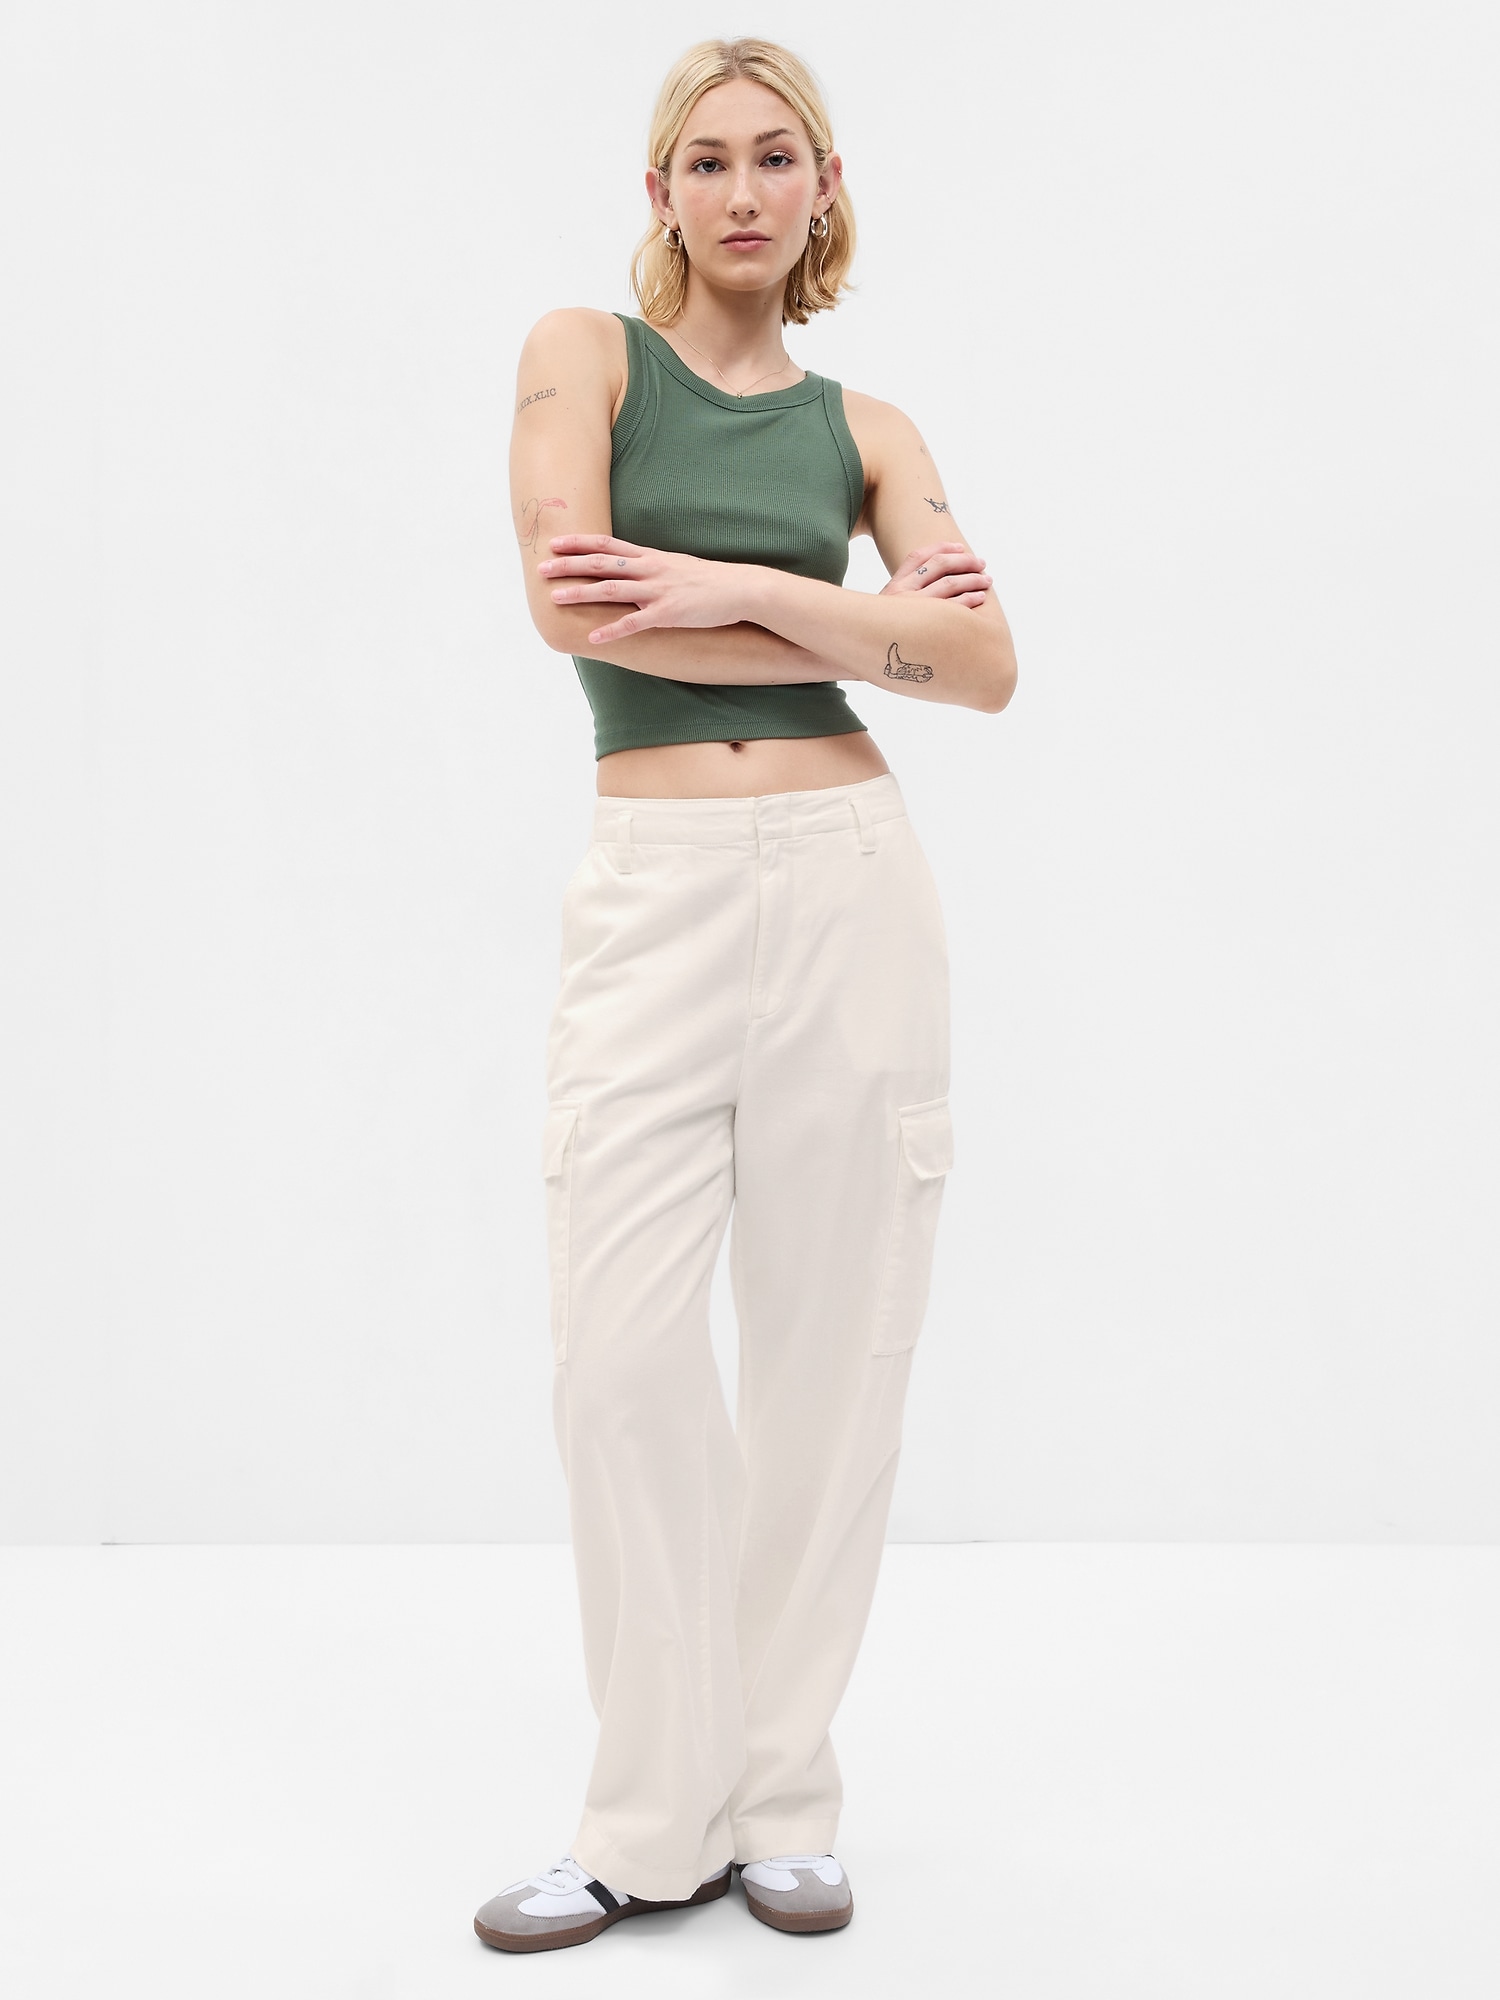 Mini Twill Ruched Ankle Cargo Pants - Olive